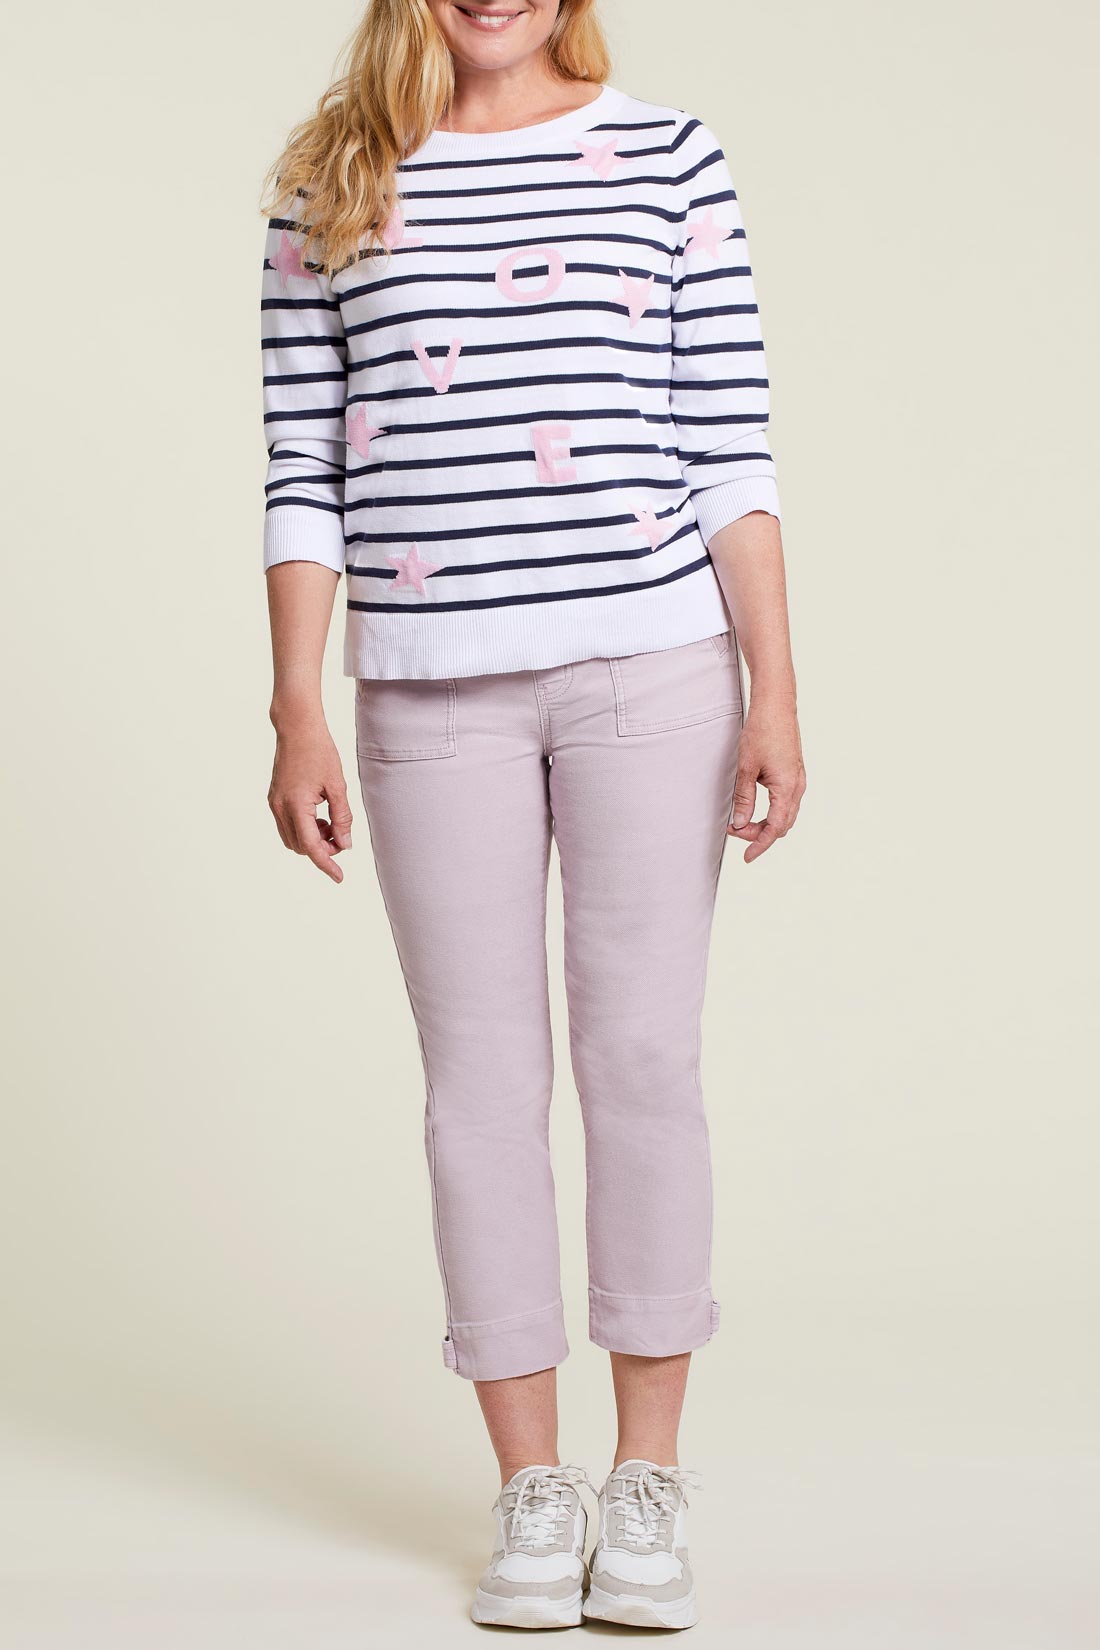 With Love Striped Boatneck Sweater by Tribal